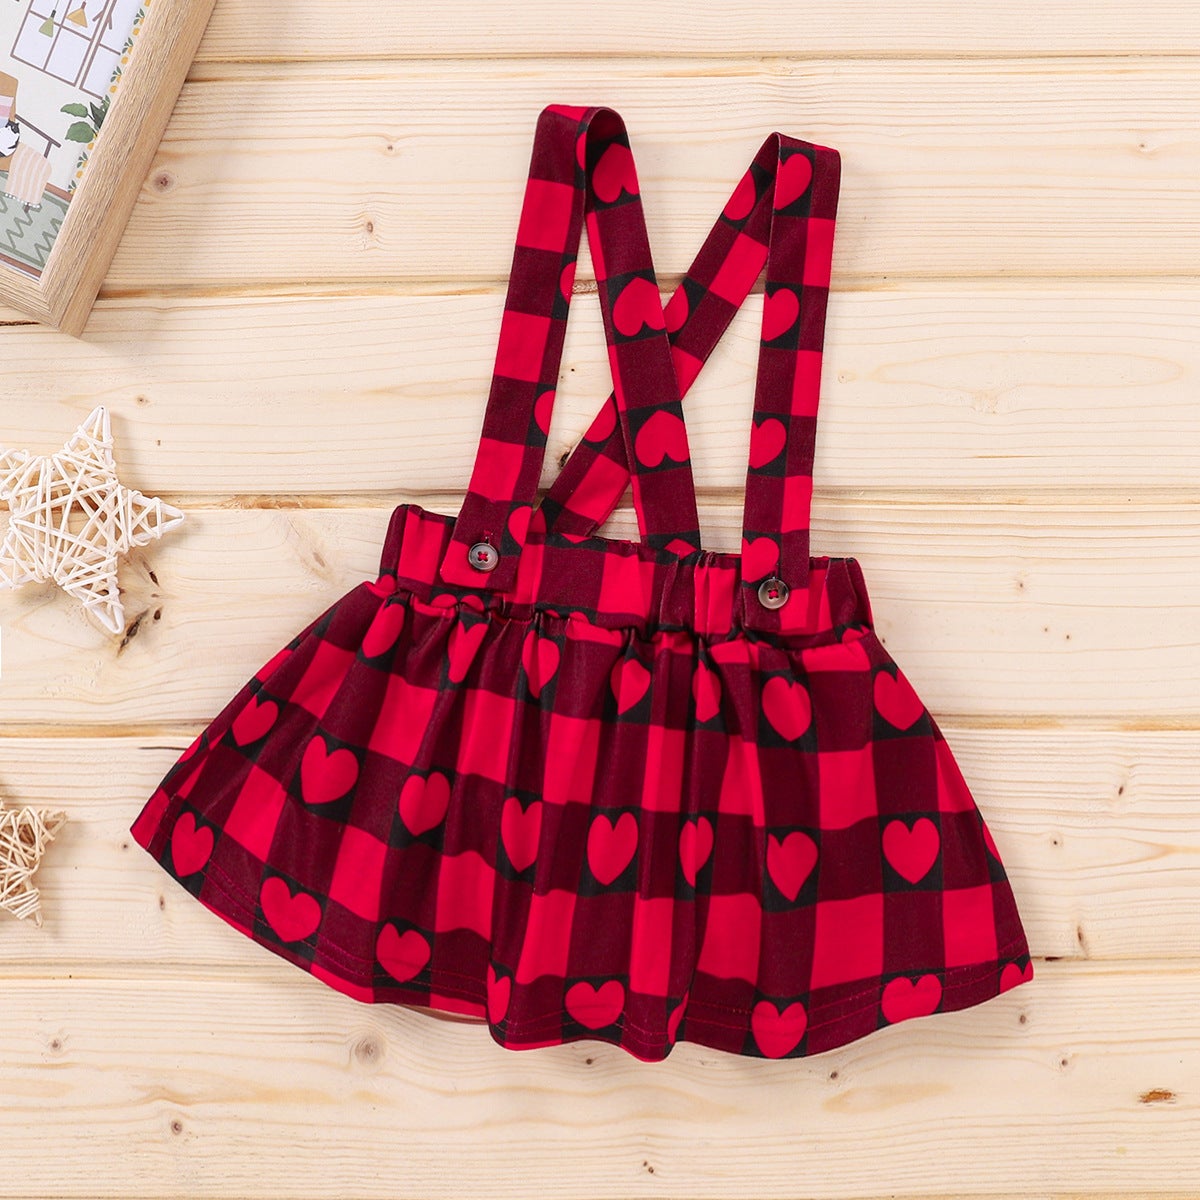 Baby Kid Girls Valentine's Day Check Suit Red Heart Short Sleeve 2 Pcs Sets